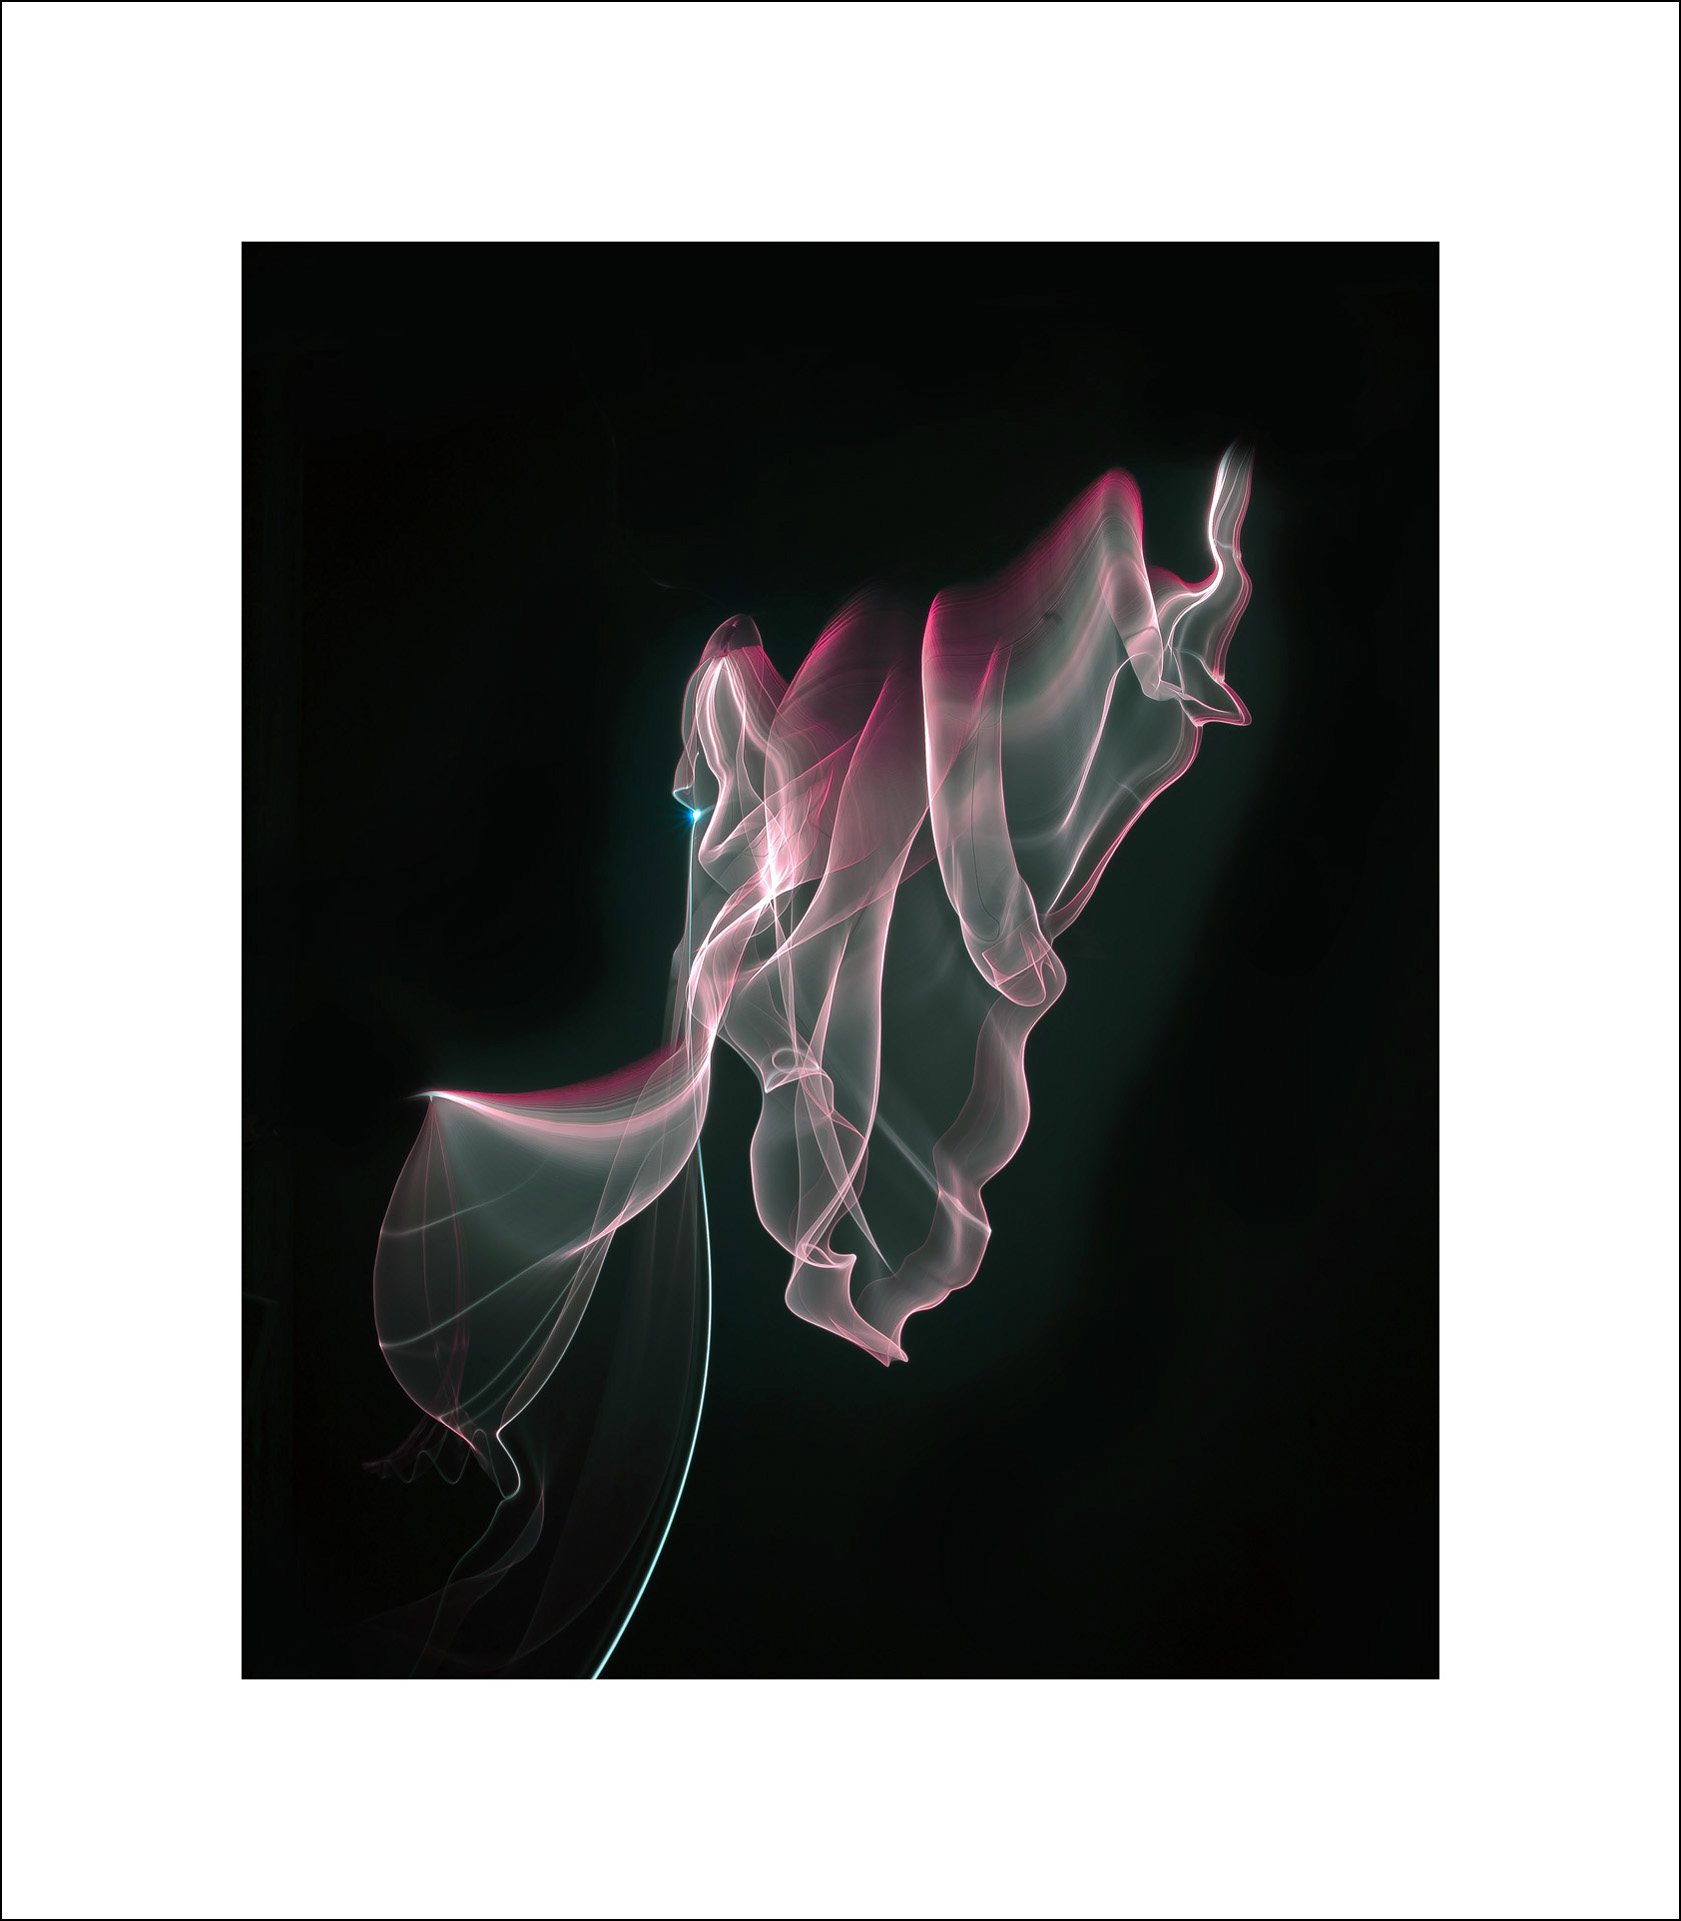 ABSTRACT PHOTOGRAPHY, BLACK PHOTOGRAPHY, MODERN FINE ART GICLEE PRINTS